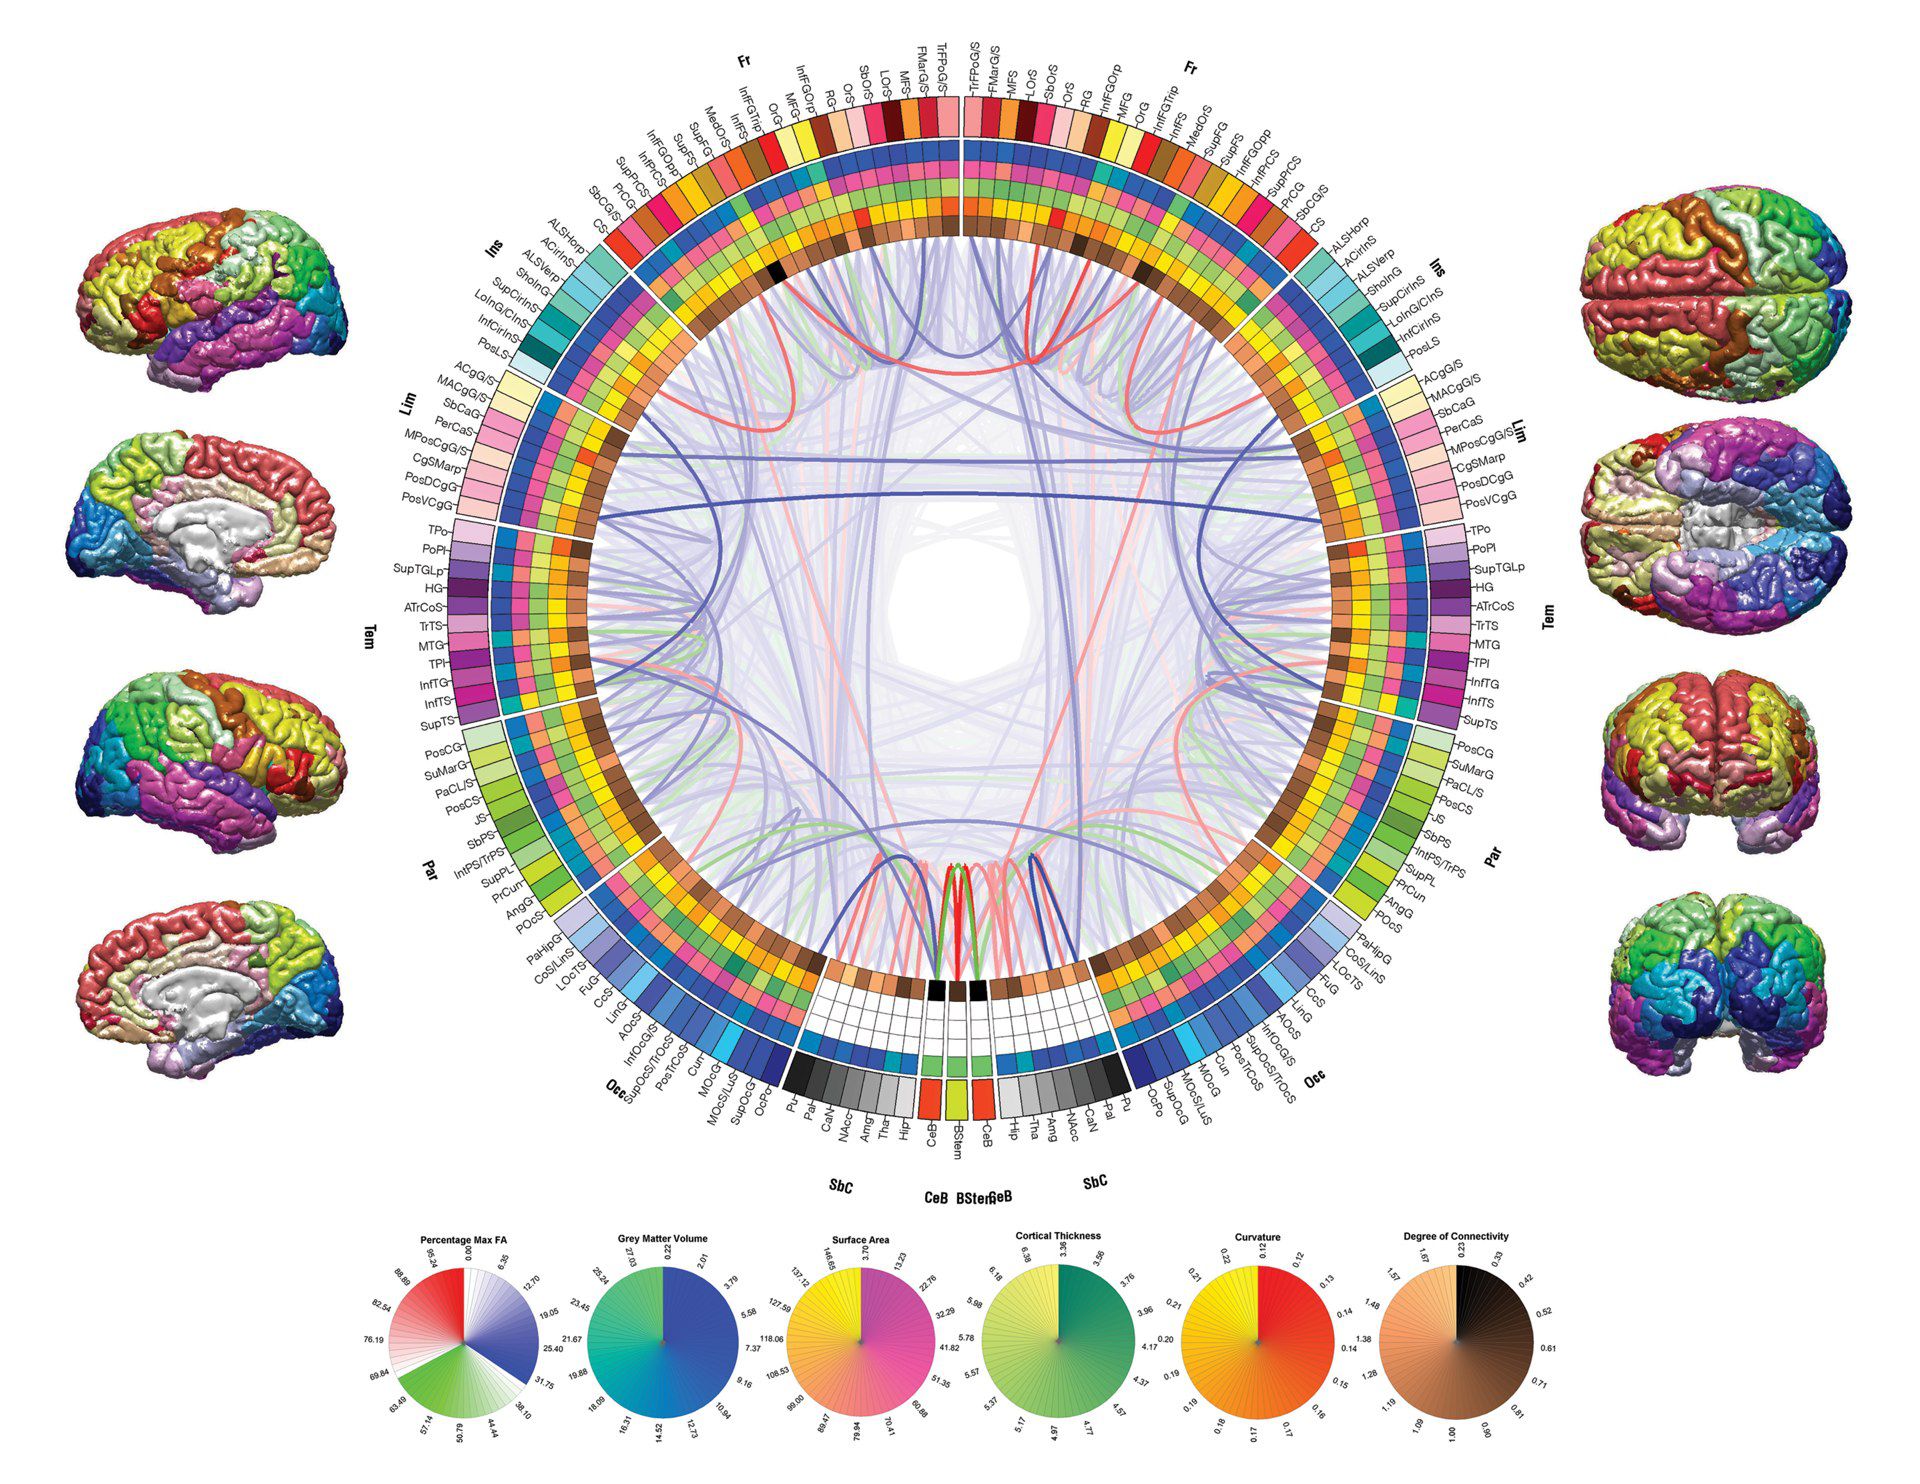 Mapping Morphometry and Connectedness of the Human Brain